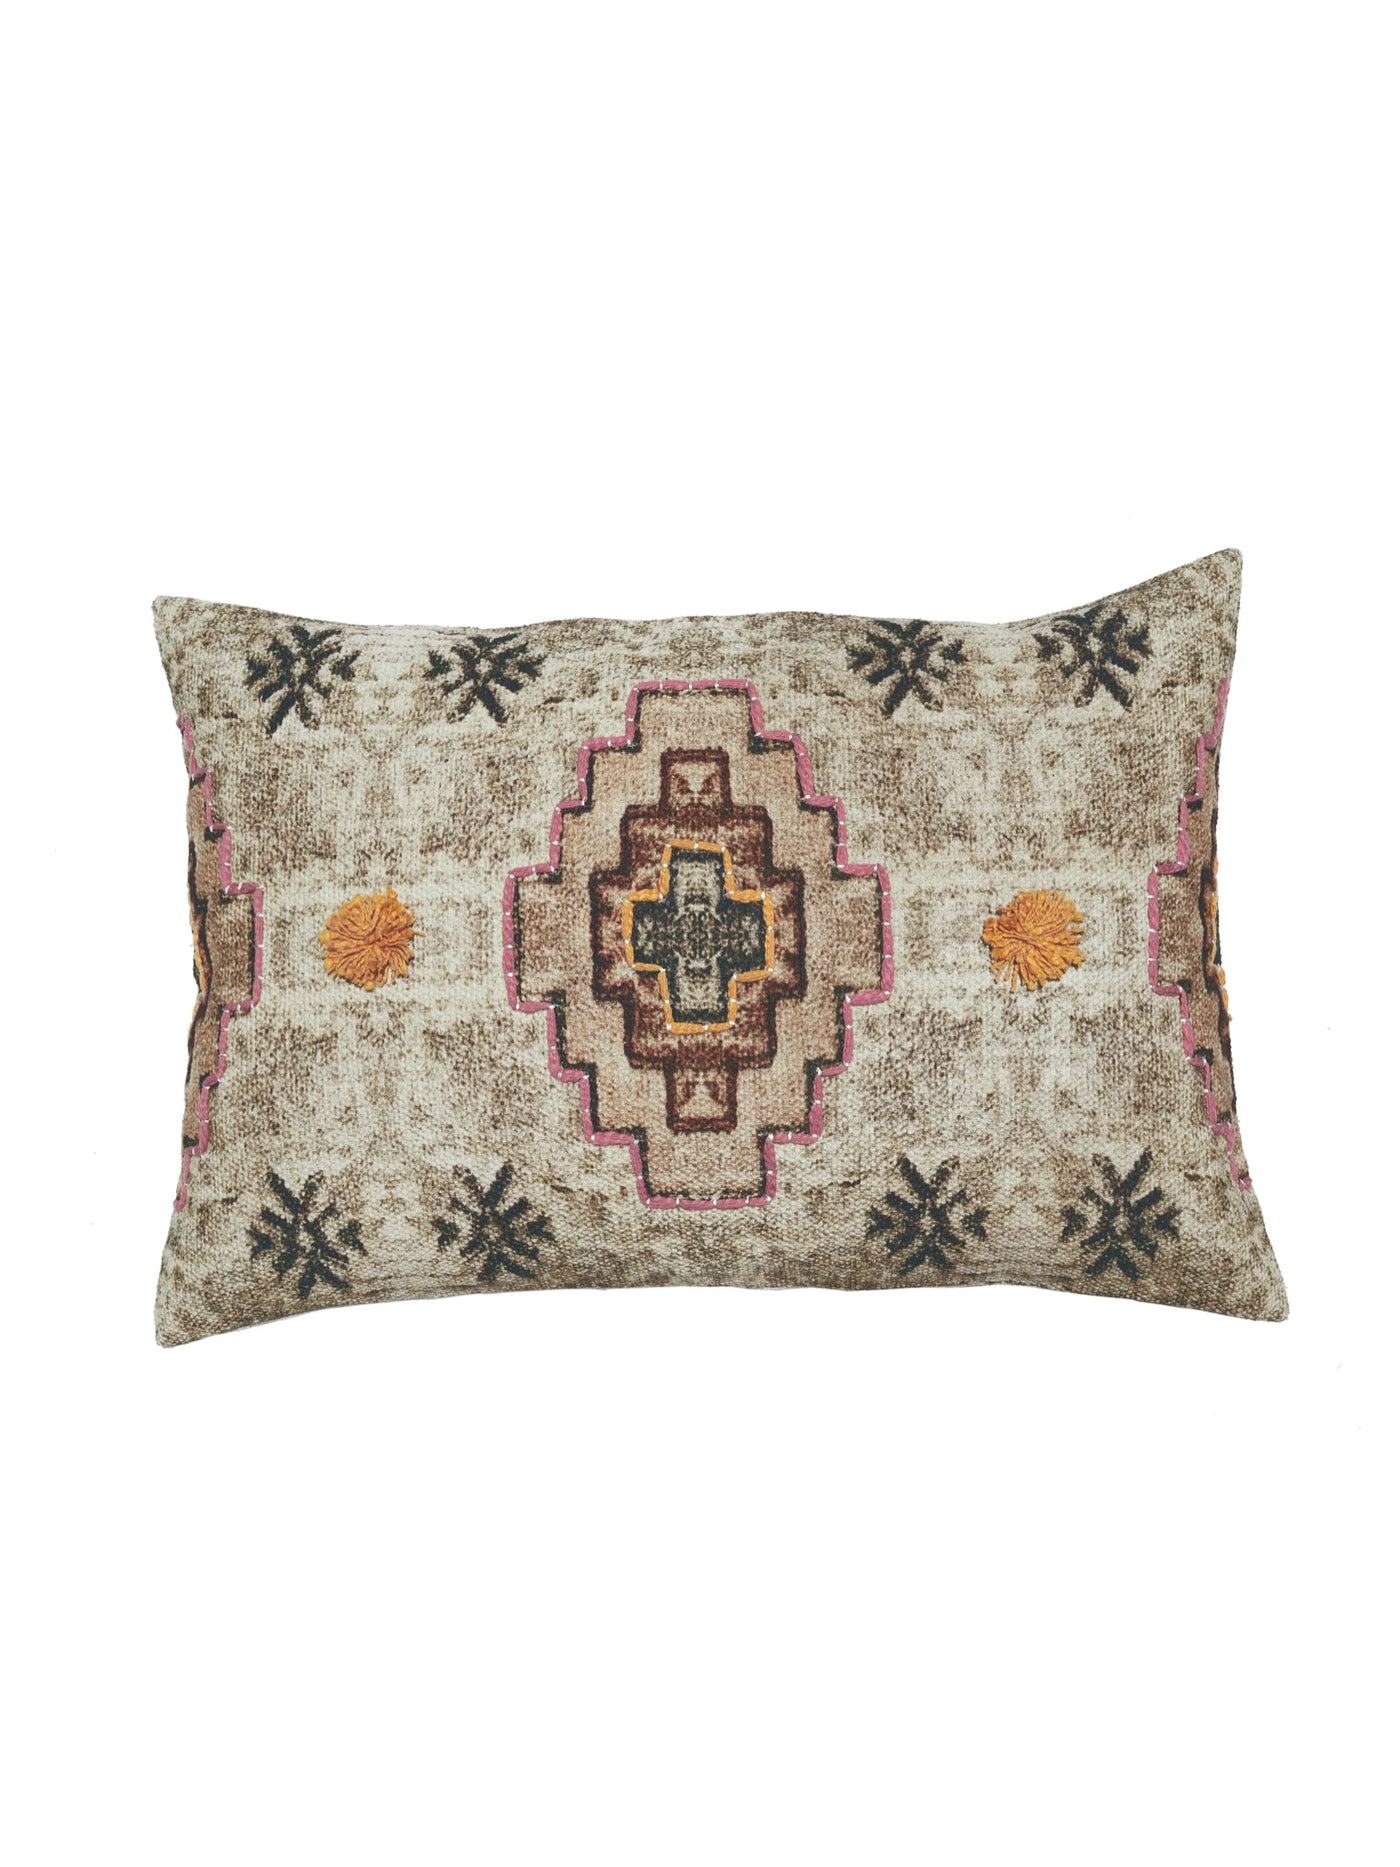 Adamas Embroidered Pillow Cover